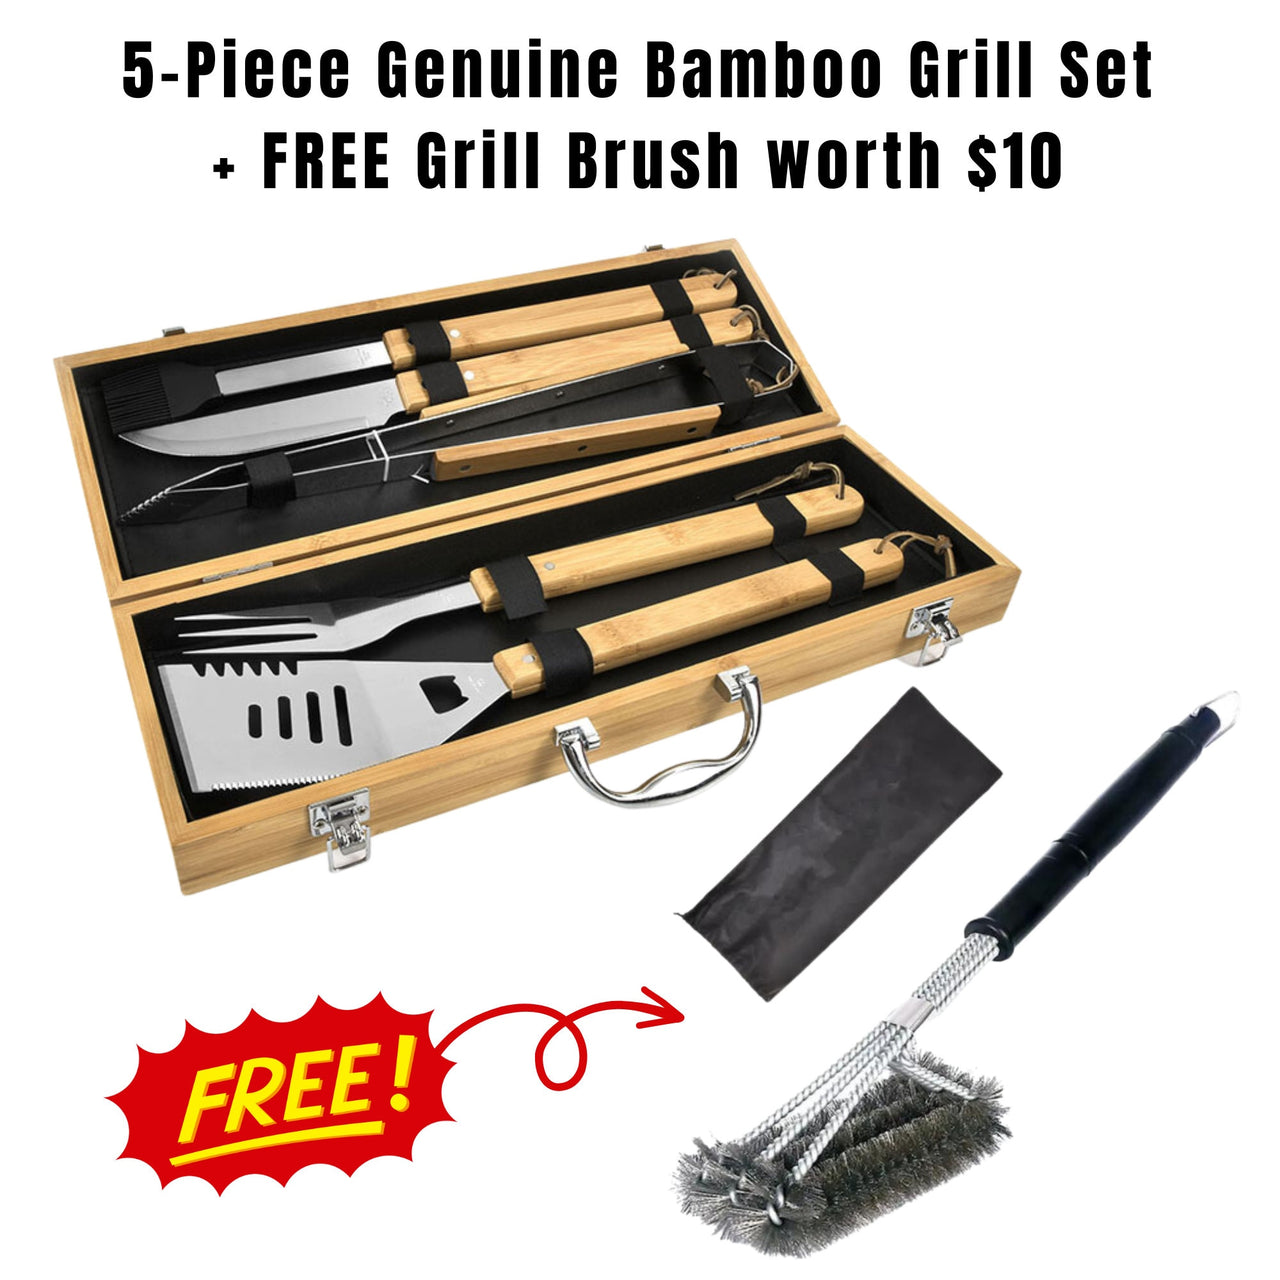 Daddy's Grill Gift - Personalized Grill Set for Dad, Custom Grilling Tool Set